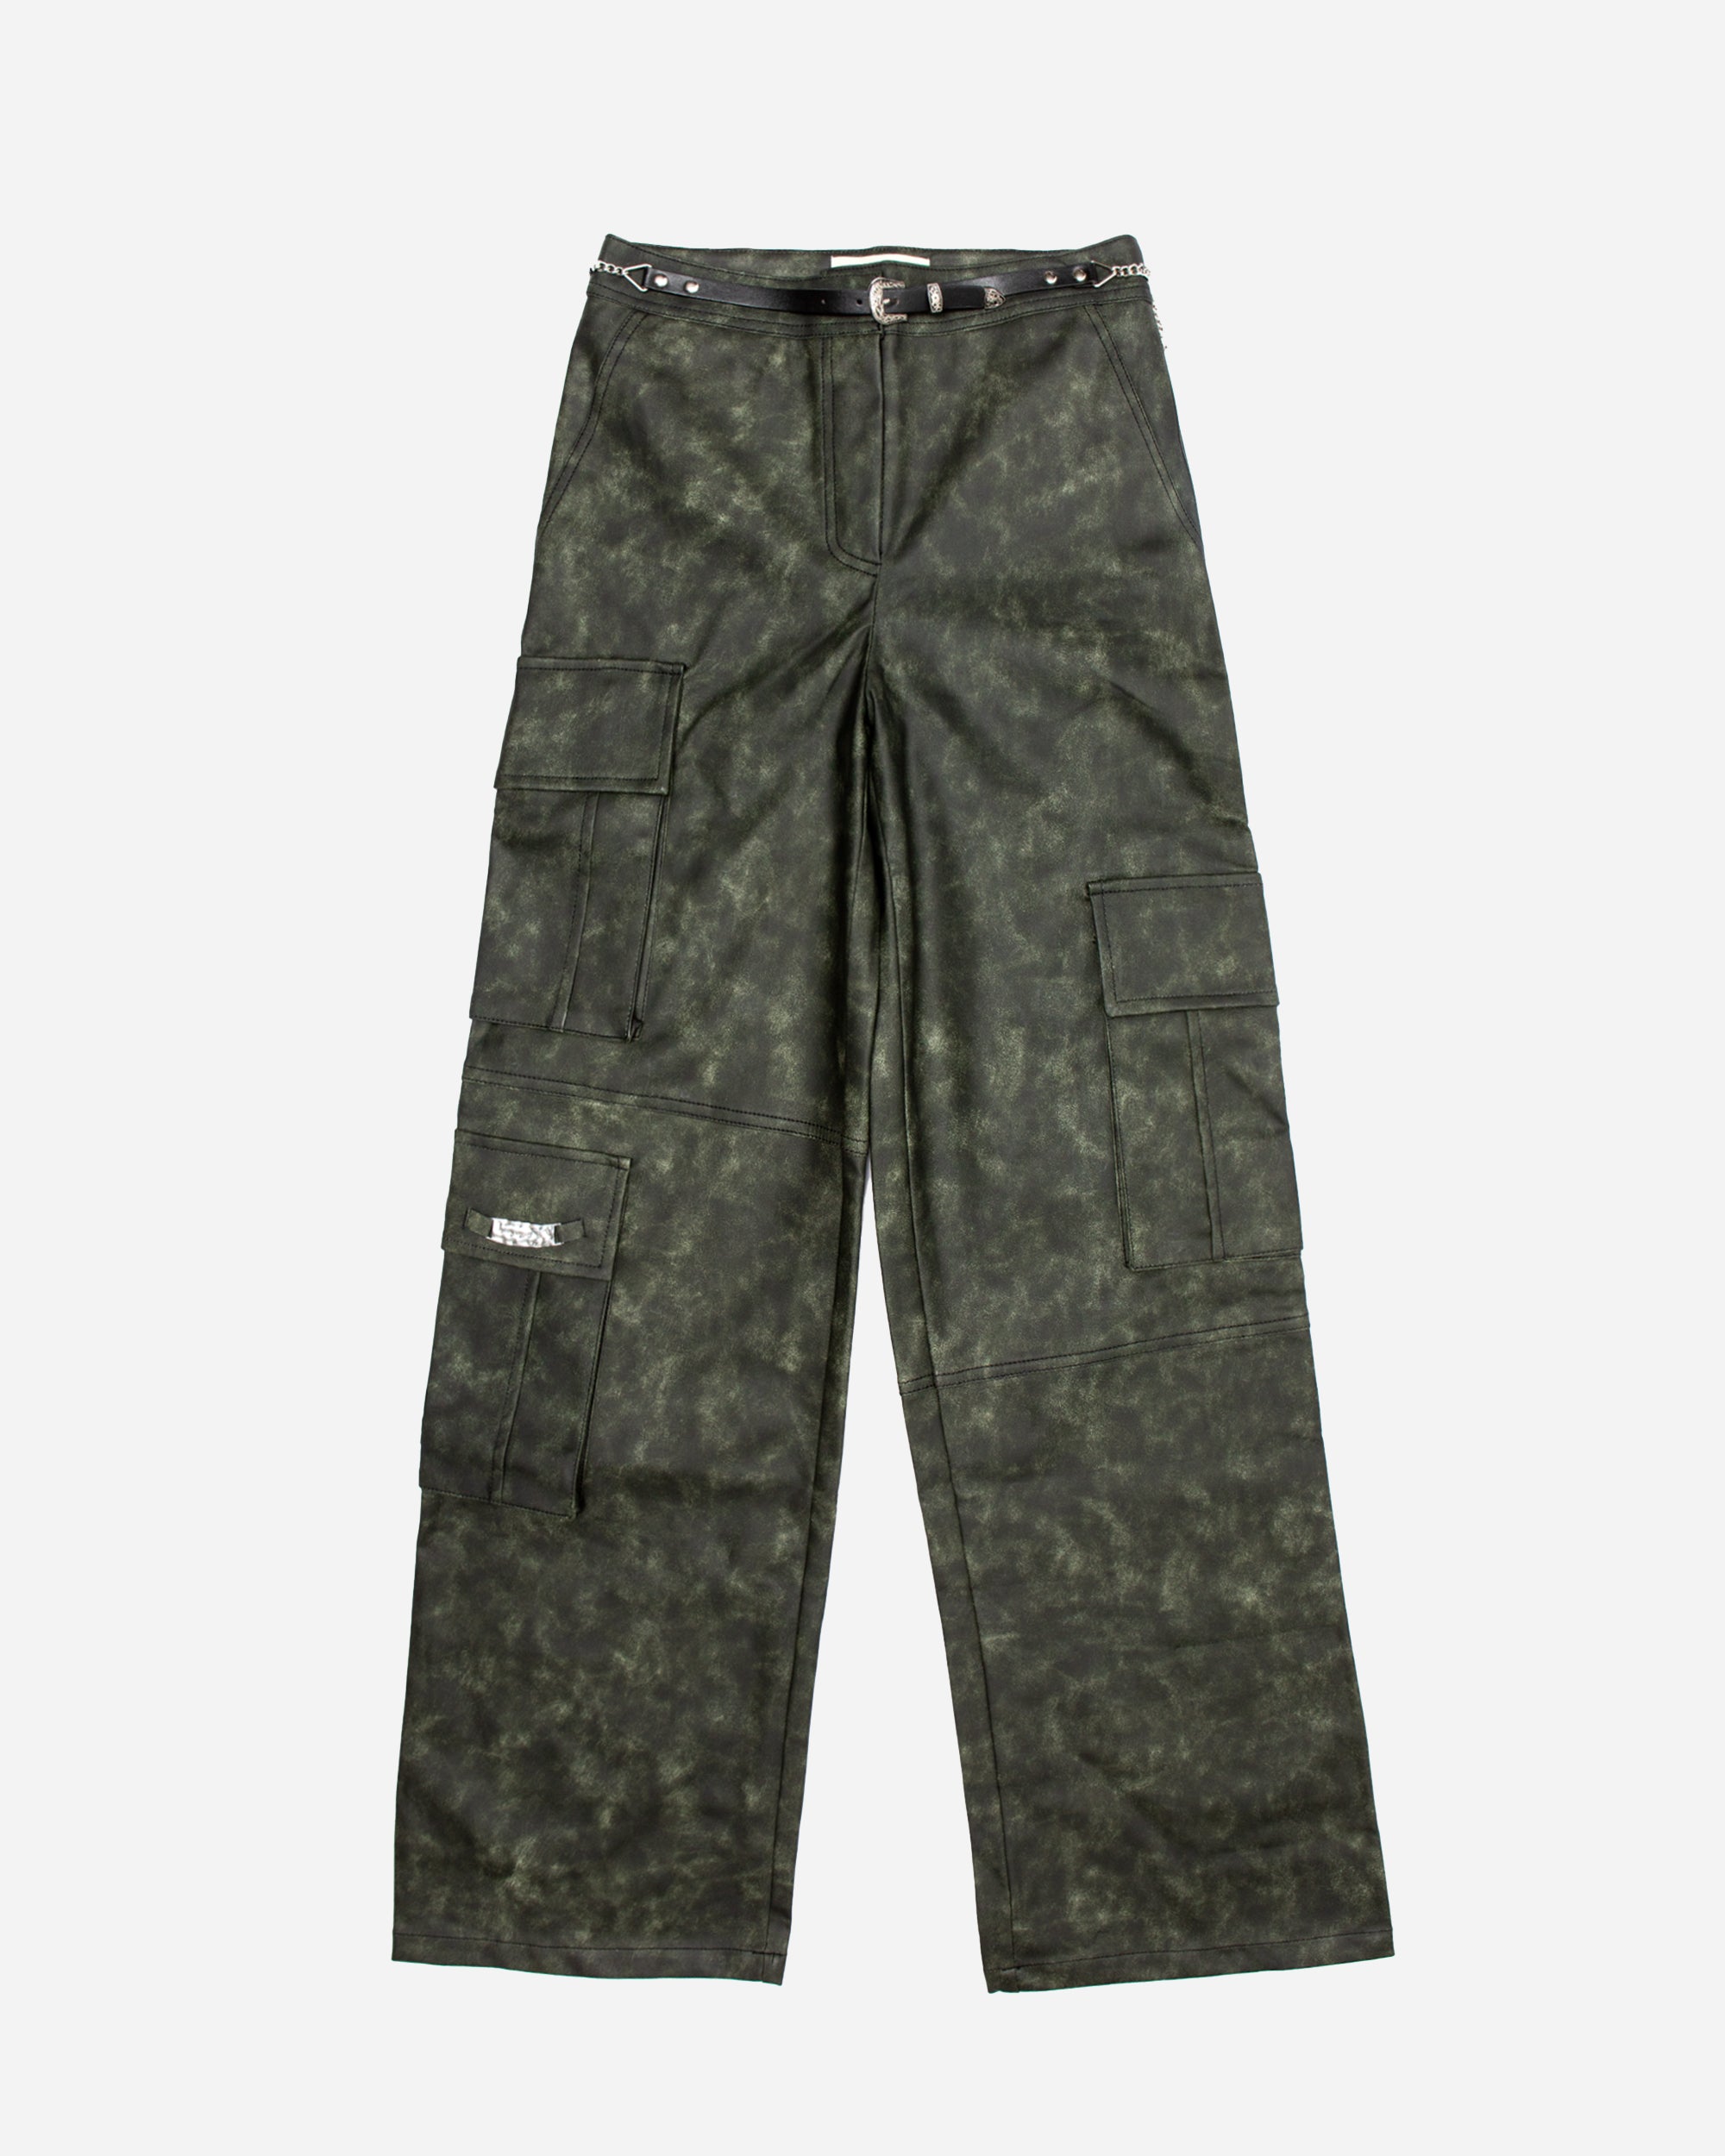 Andersson Bell Belted Cargo Pants KHAKI apa665w-KHA